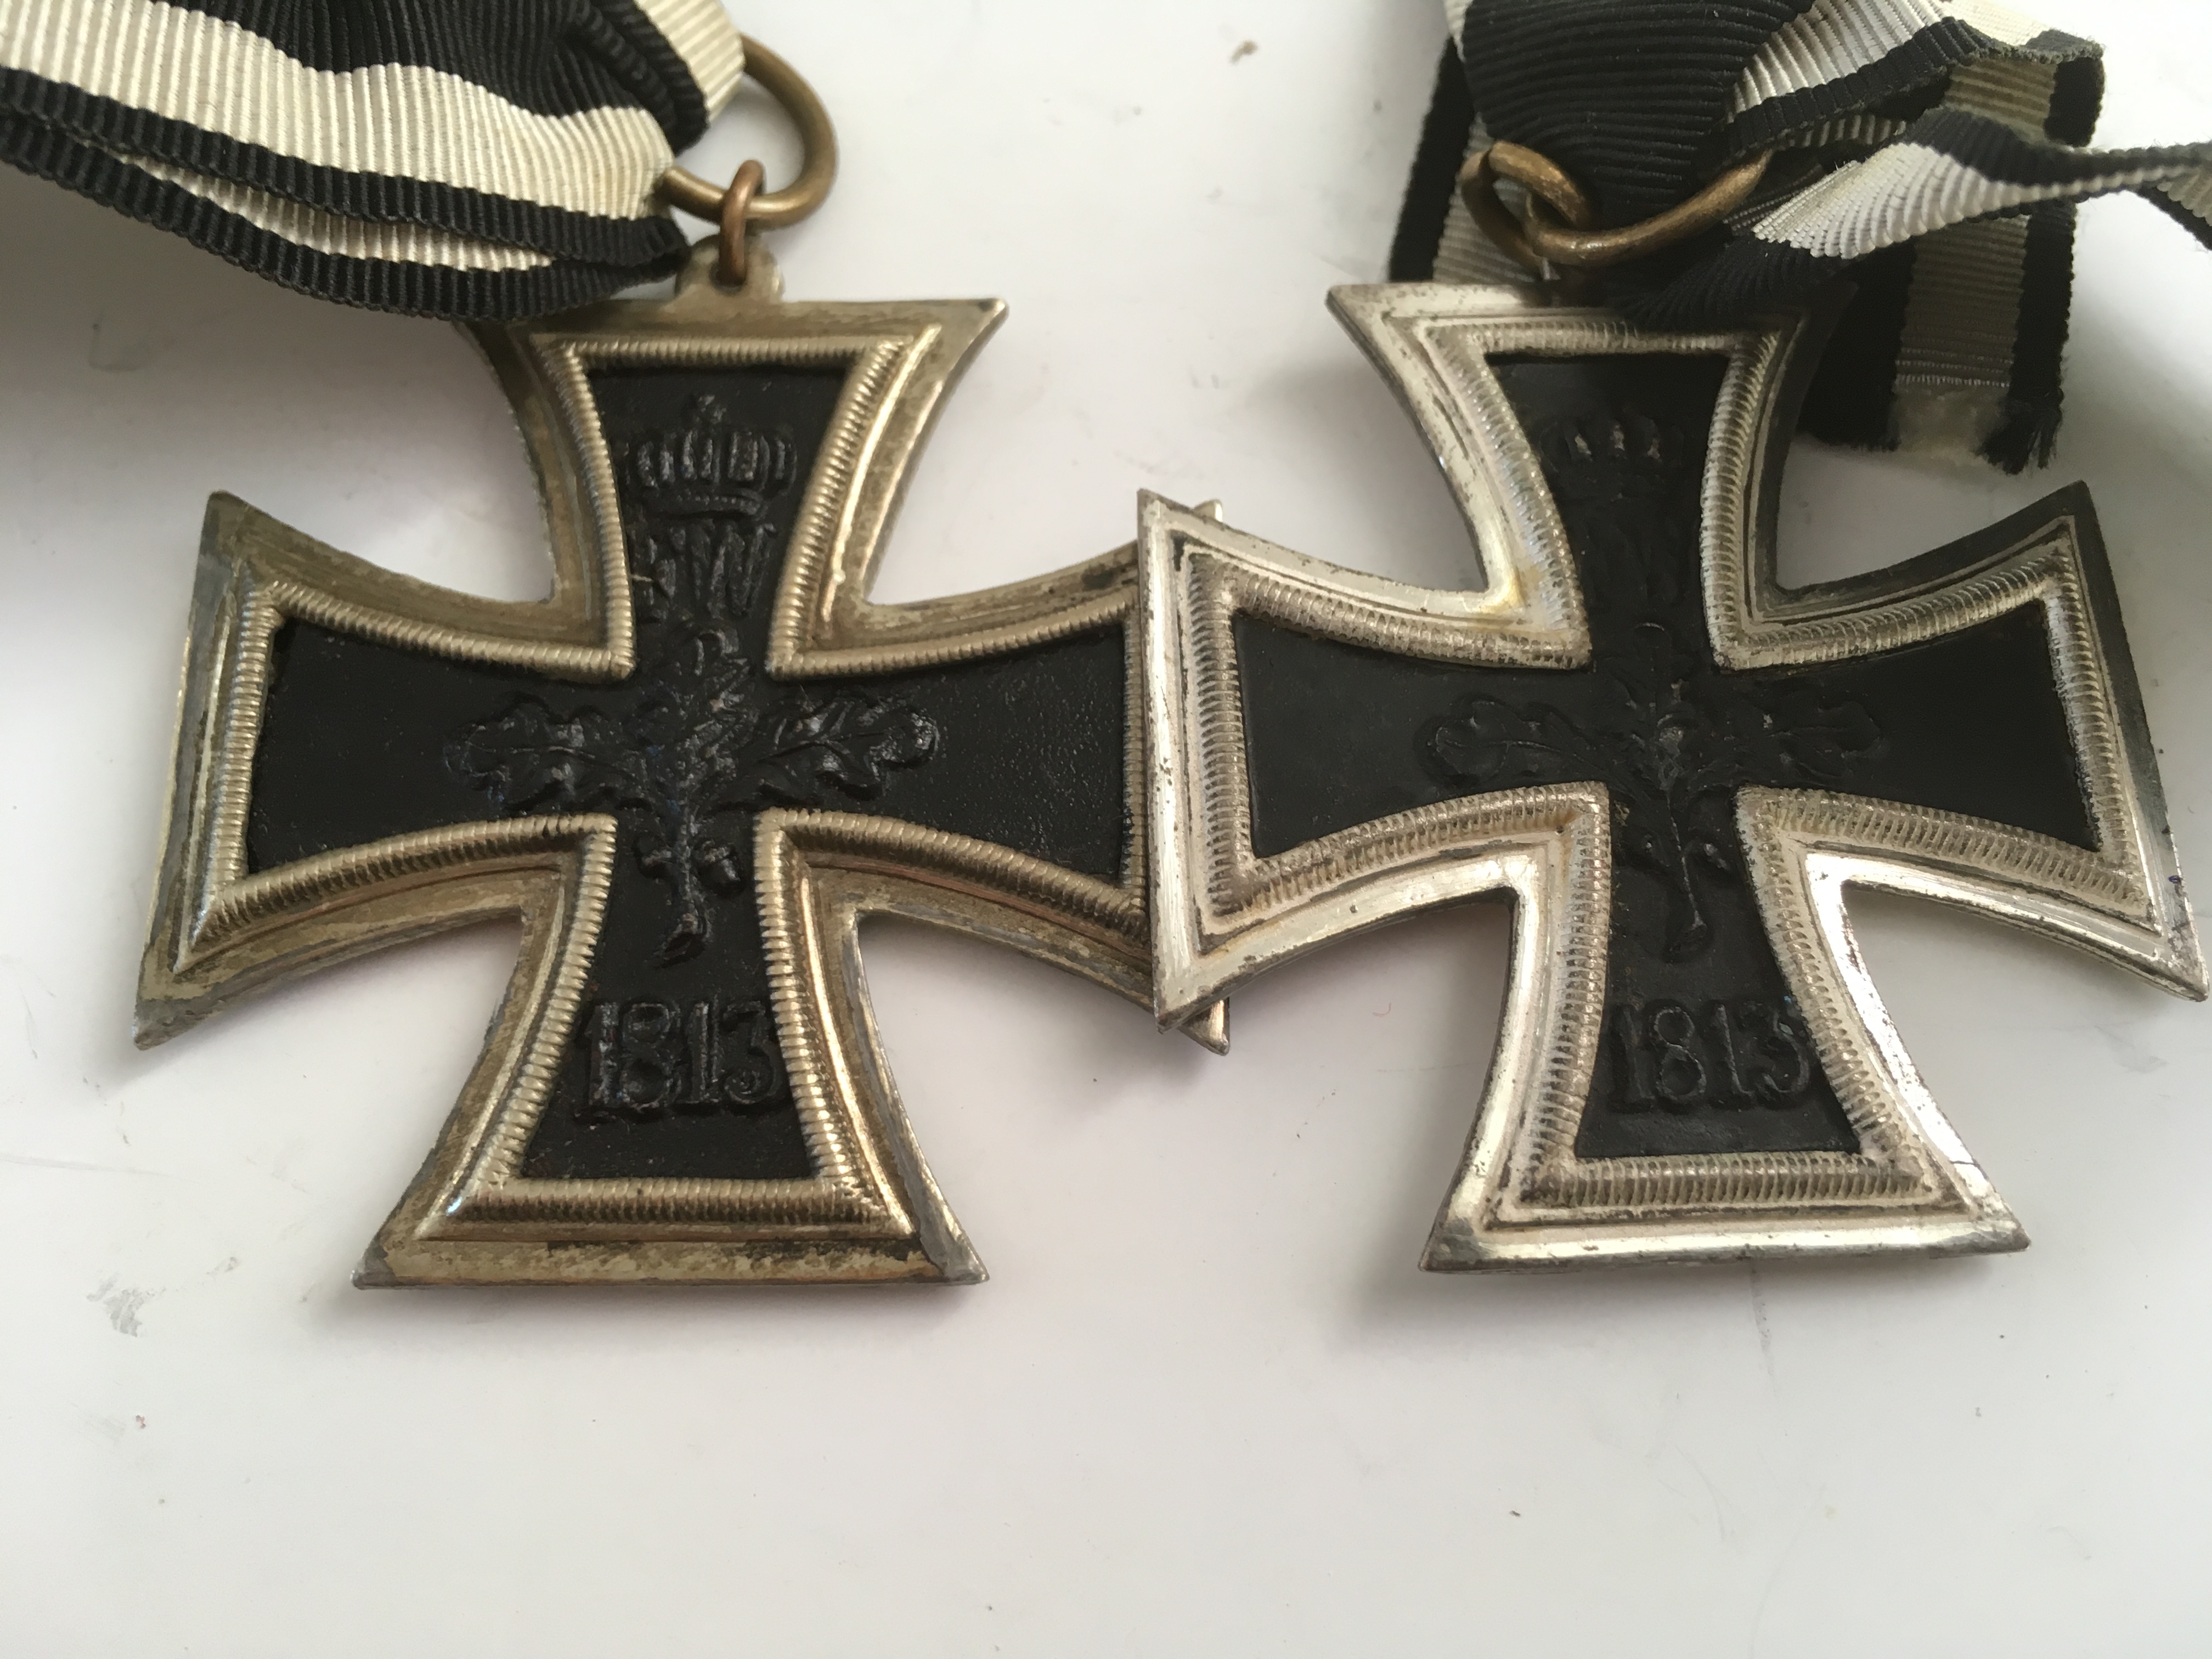 MEDALS: GERMAN WW1 MERIT CROSS FOR WAR AID (NO RIBBON), TWO IRON CROSS 1870, - Image 6 of 7